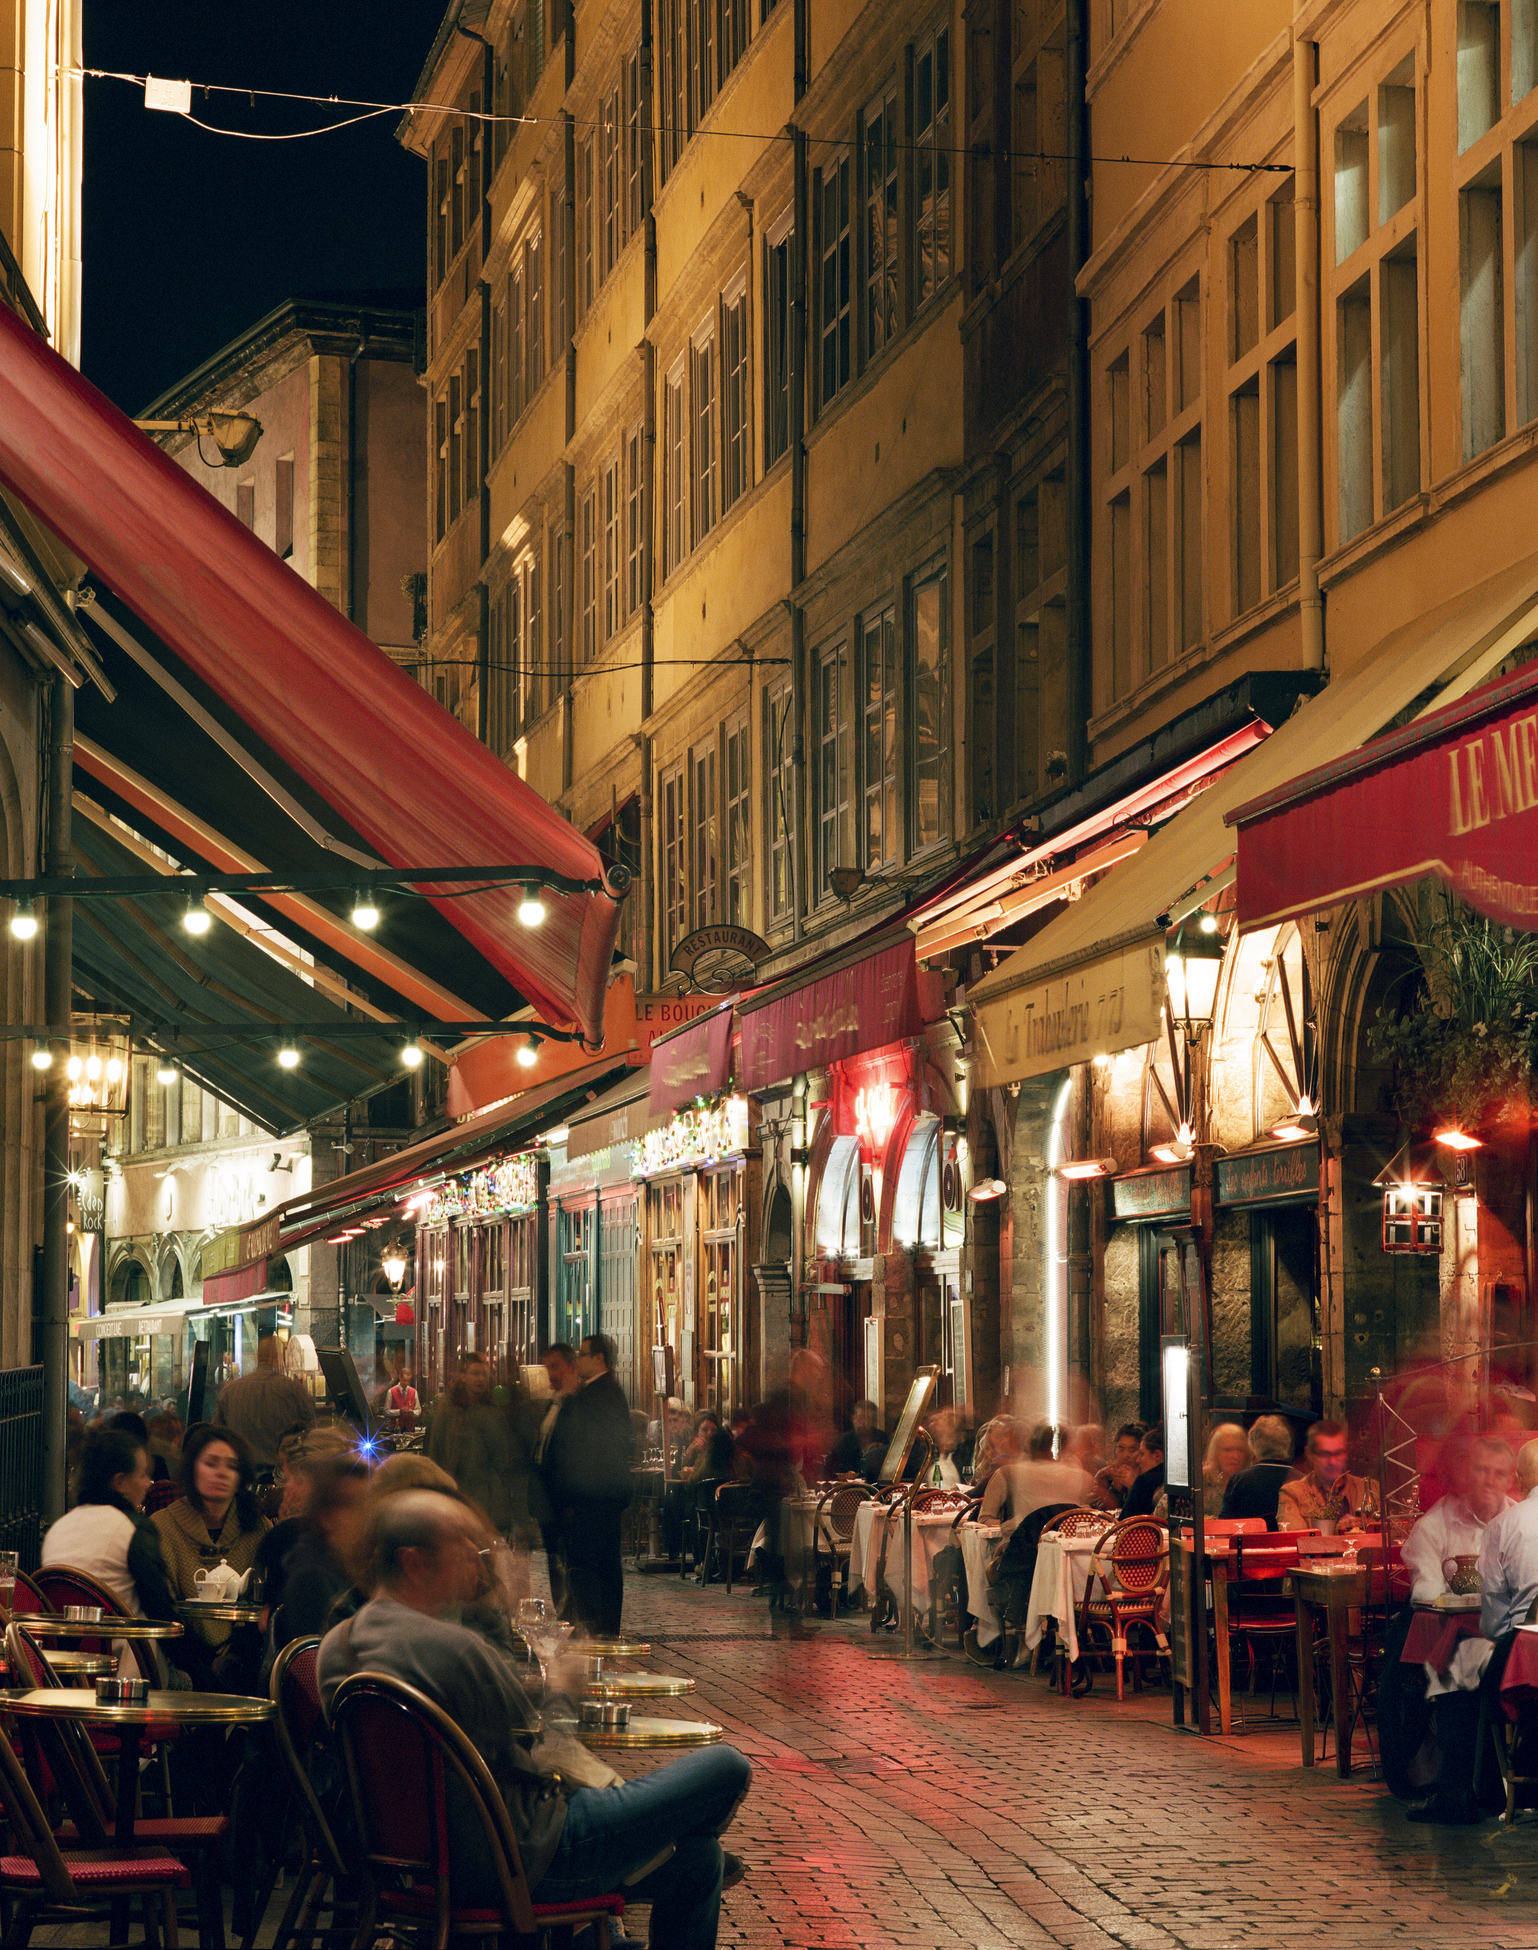 Outdoor dining scene at night with people at tables on a city street